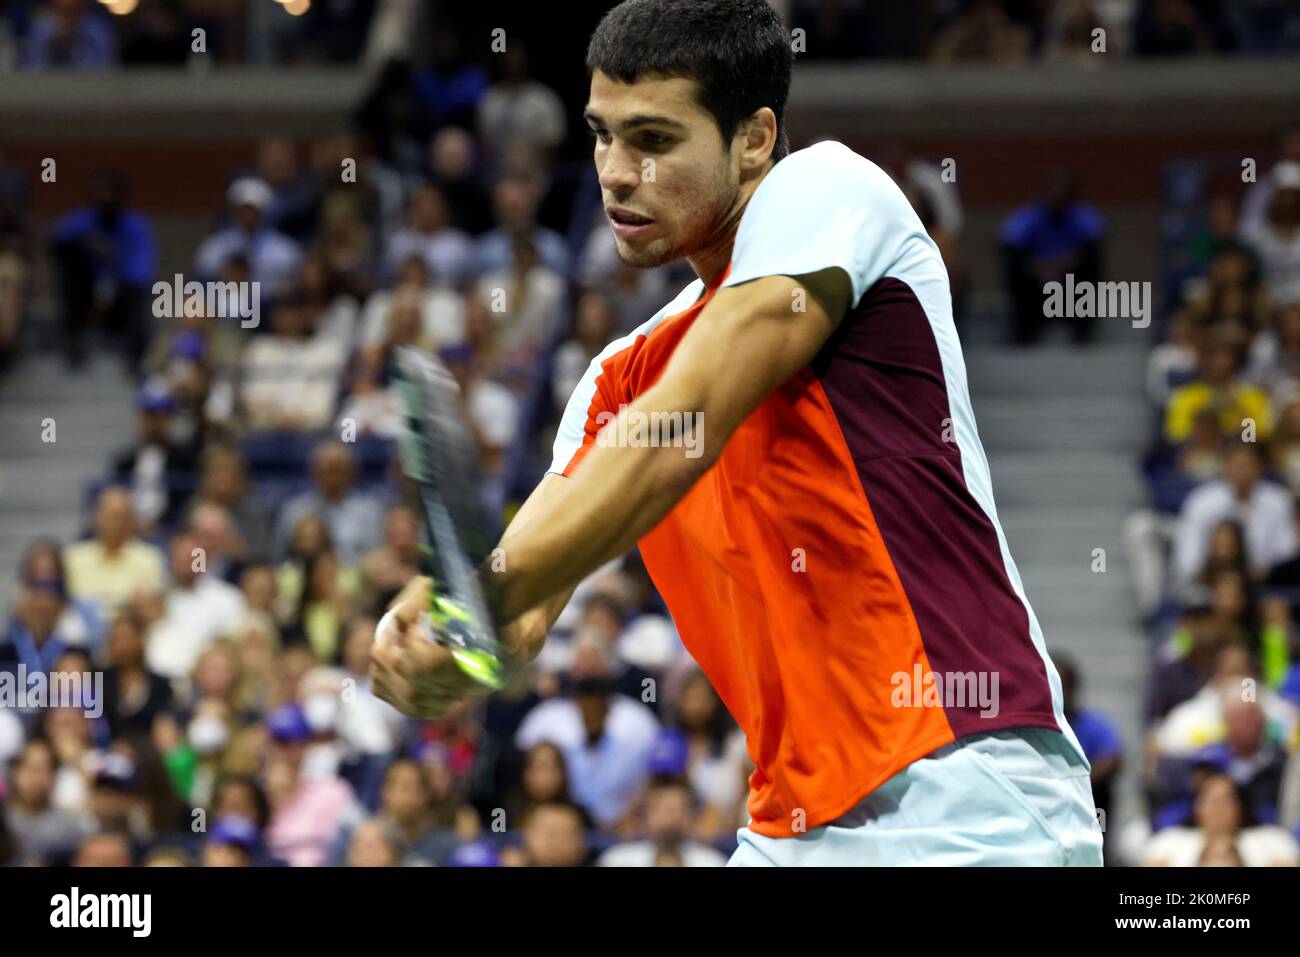 NEW YORK, NY - September 11: Carlos Alcaraz of Spain in action against Casper Rudd of Norway during the US Open men's final at USTA Billie Jean King National Tennis Center on September 11, 2022 in New York City. A;caraz won the match in four sets to capture his first grand slam title ever. ( Credit: Adam Stoltman/Alamy Live News Stock Photo